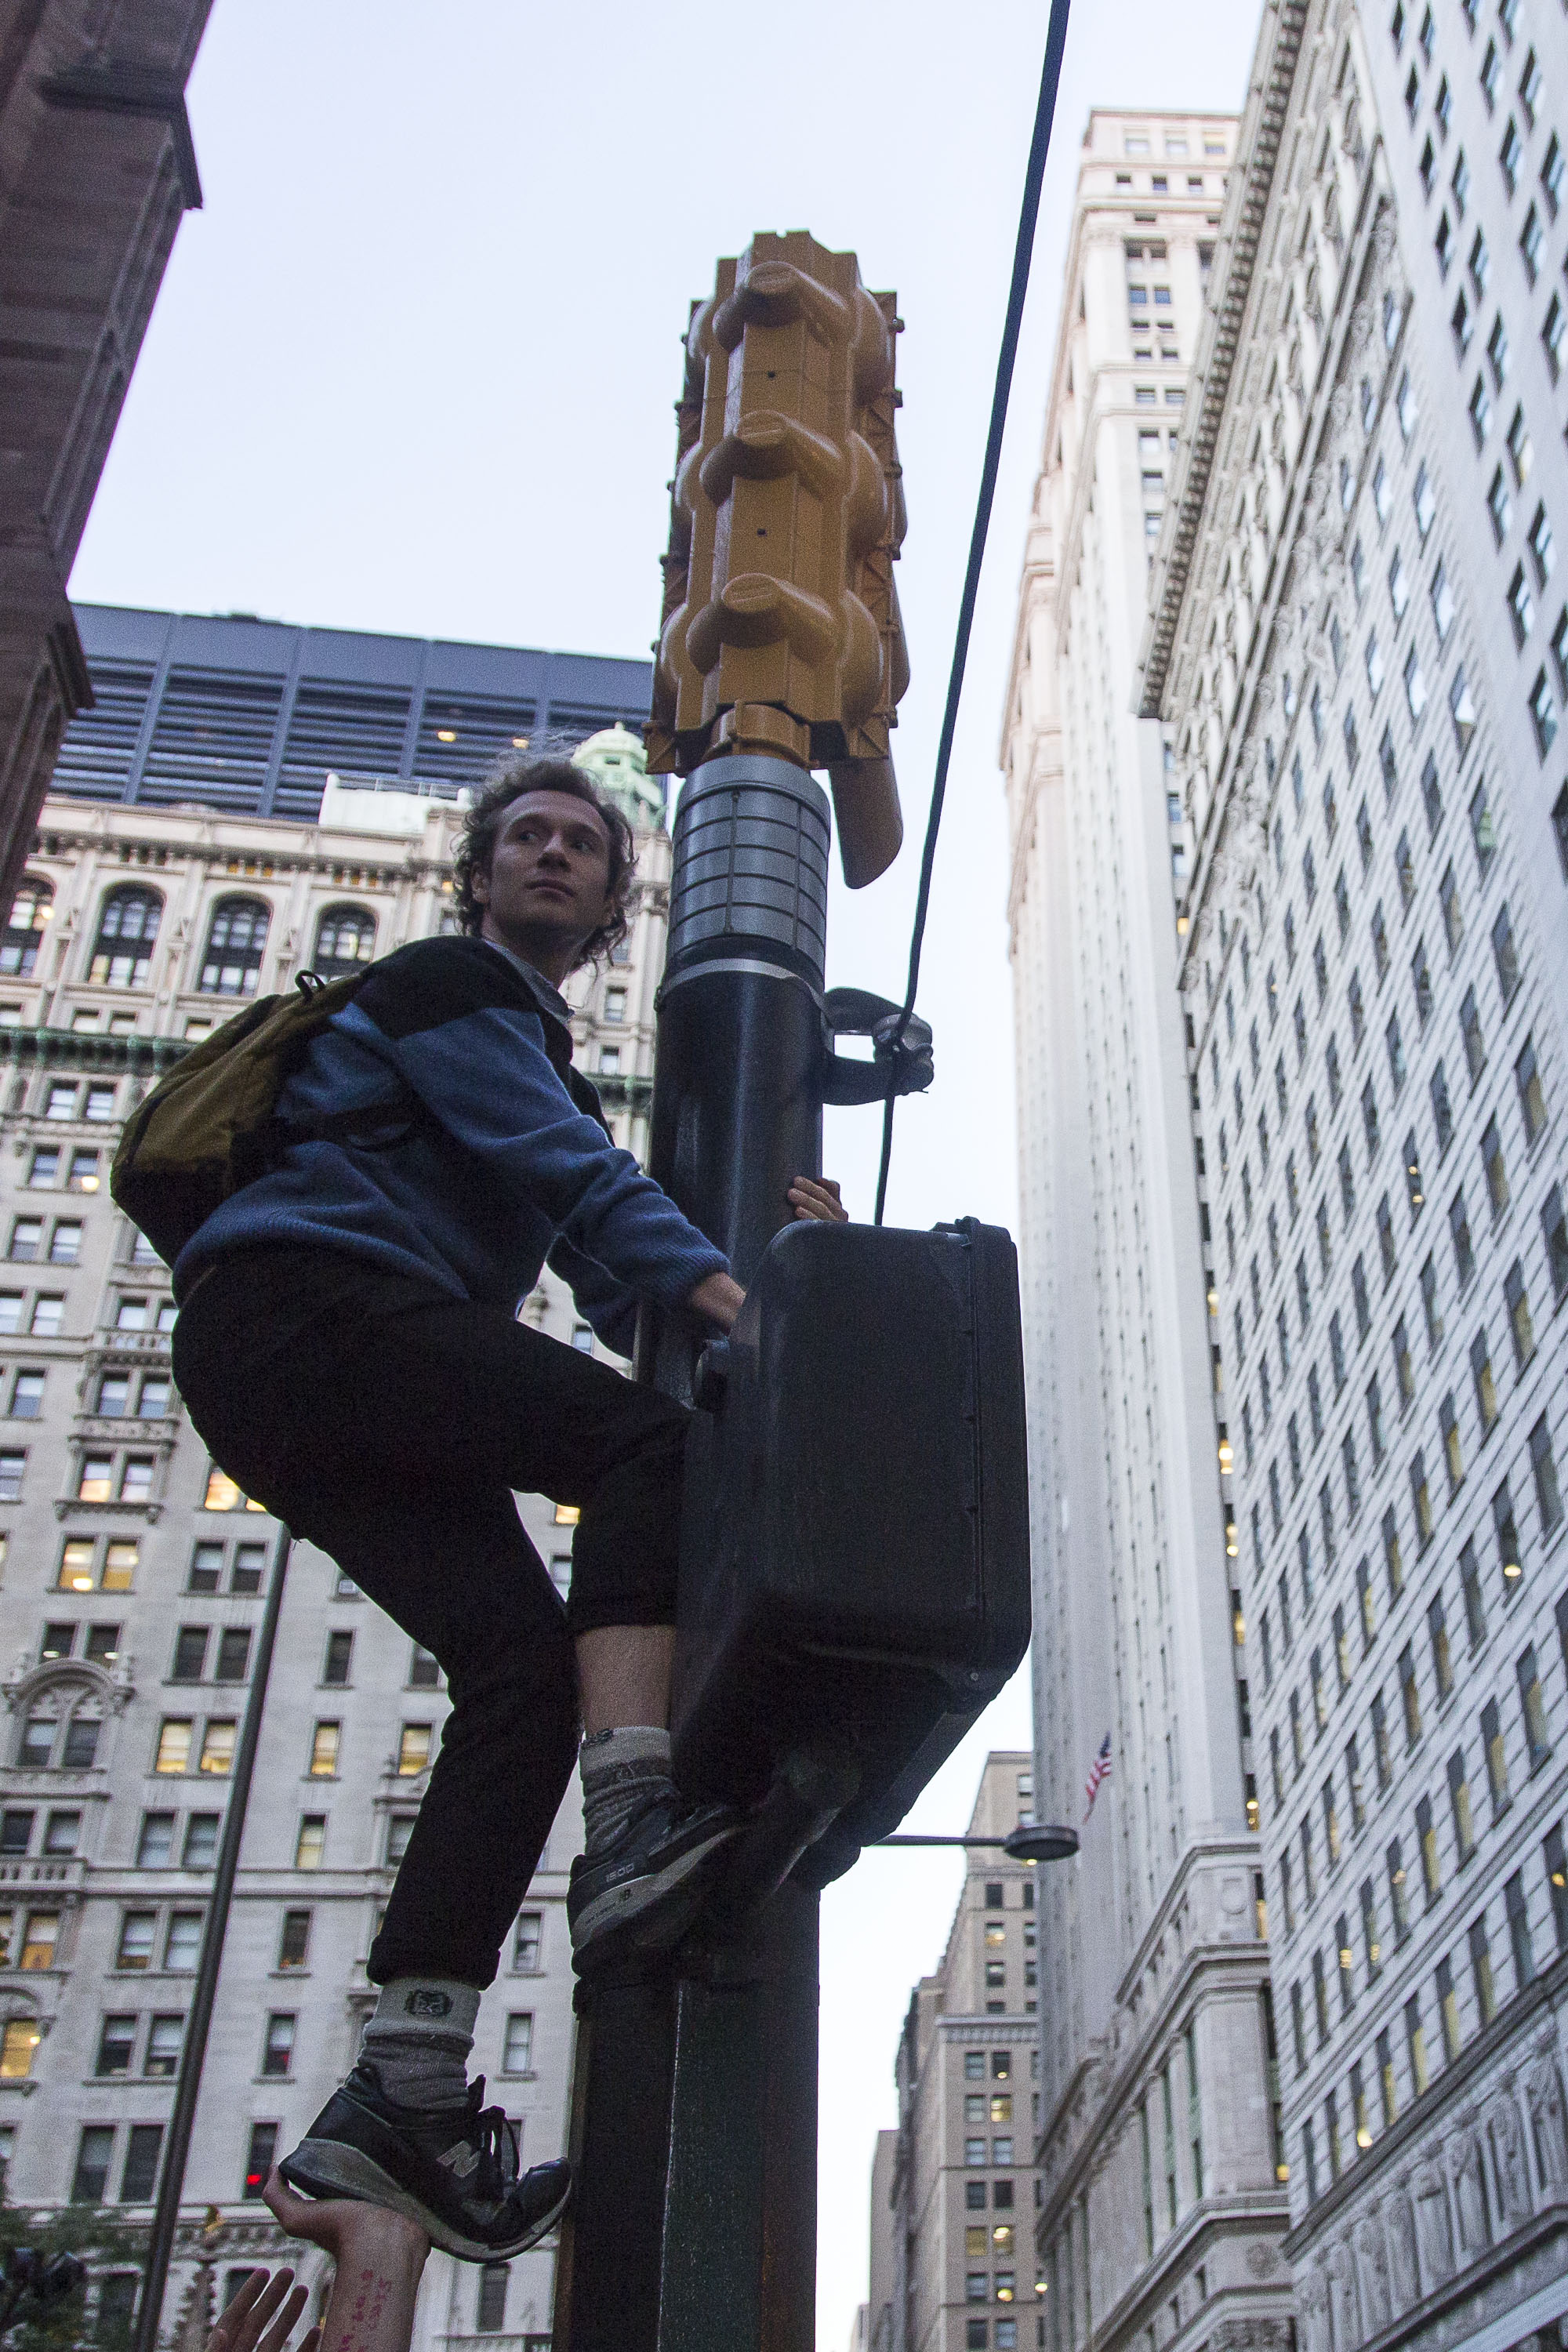  Against the wishes of the NYPD, a protestor scales a traffic signal for a better view. 